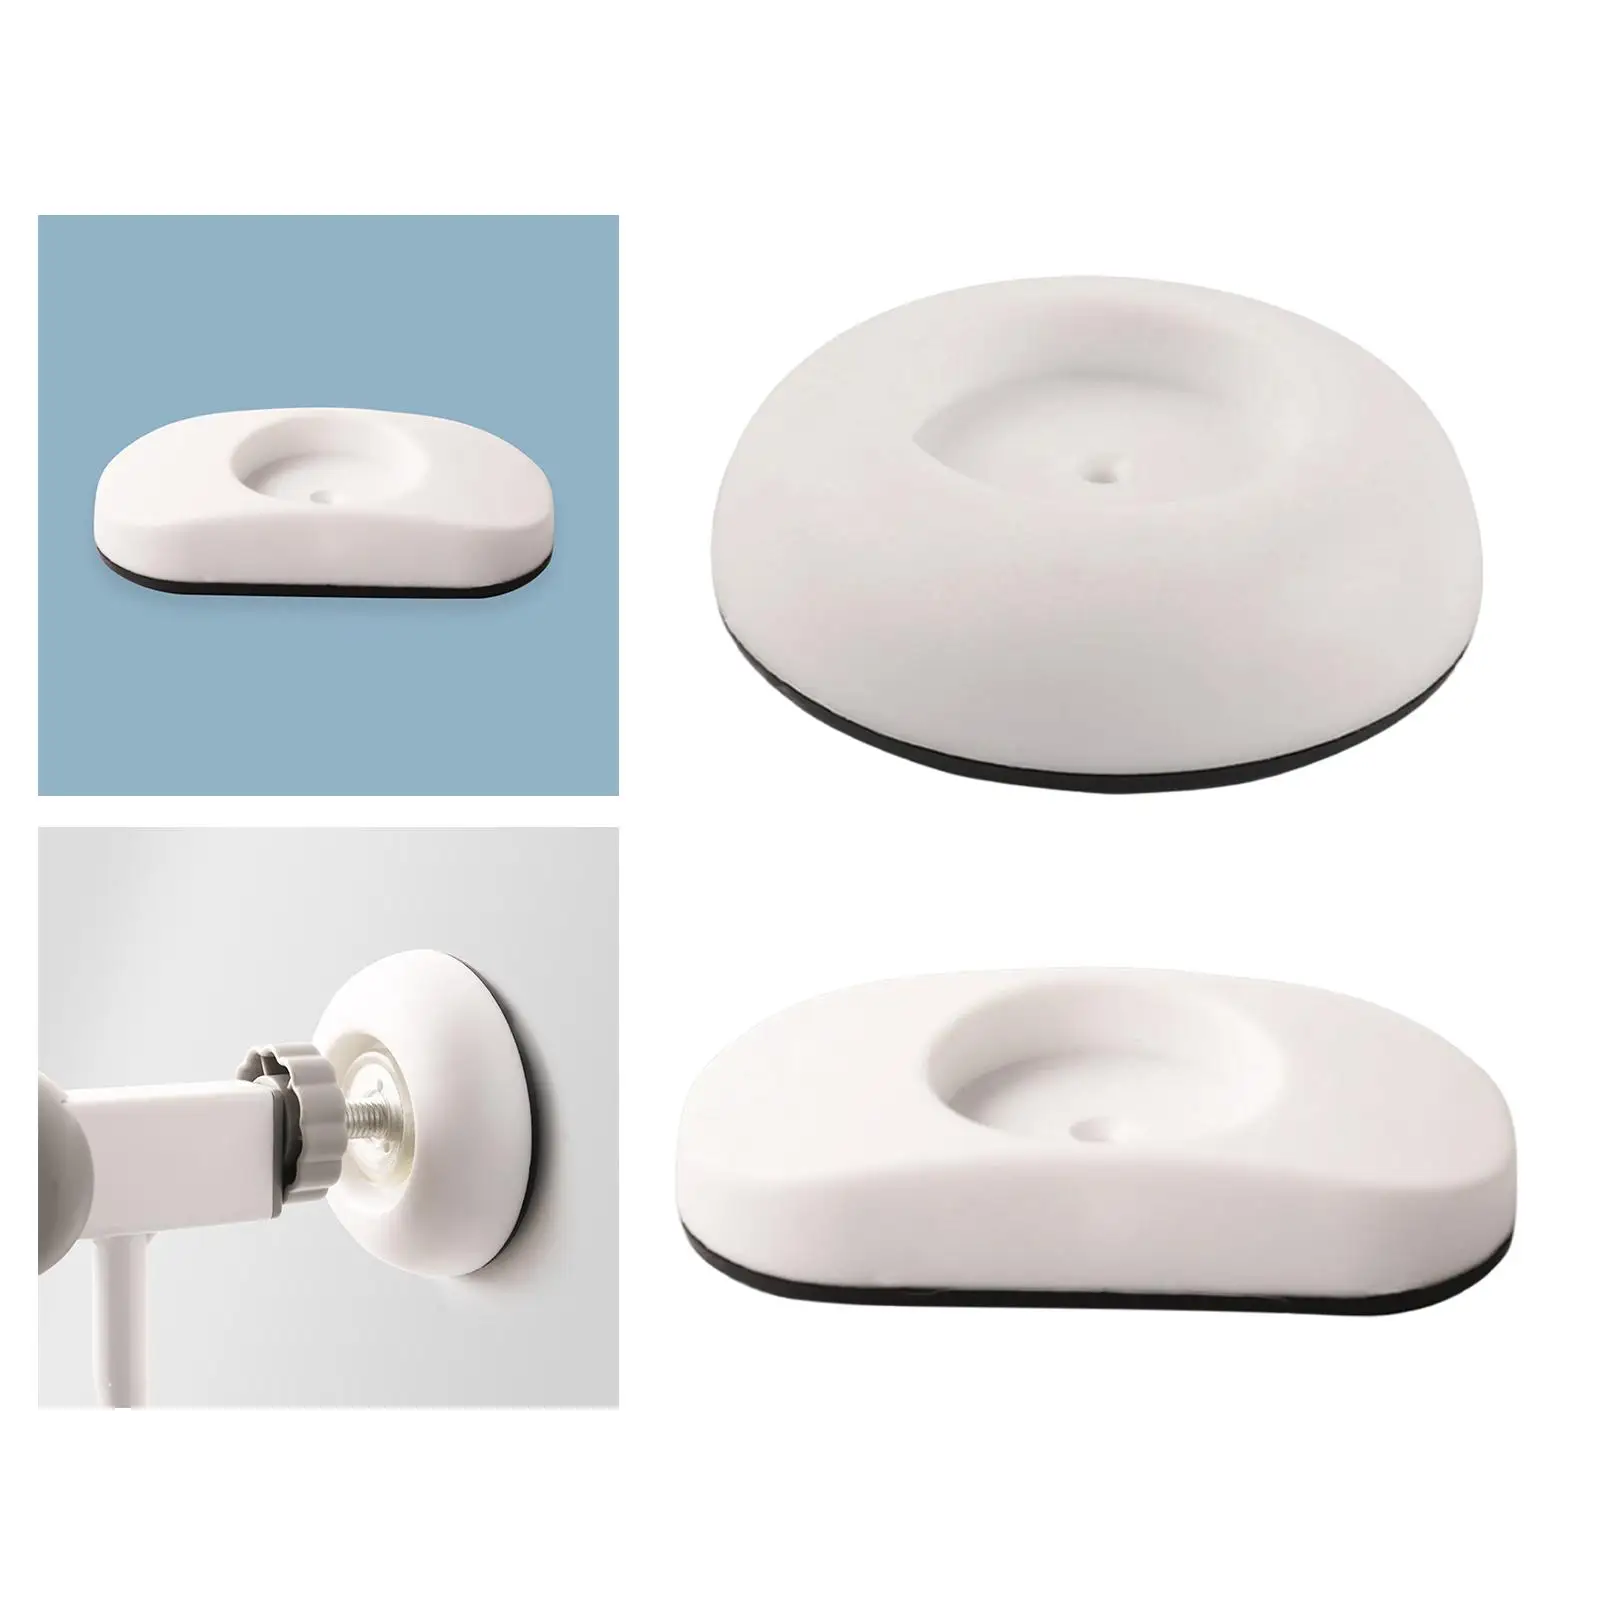 Small Gate Wall Protector Protect Walls Wall Cups for Stair Gate Indoor Gate